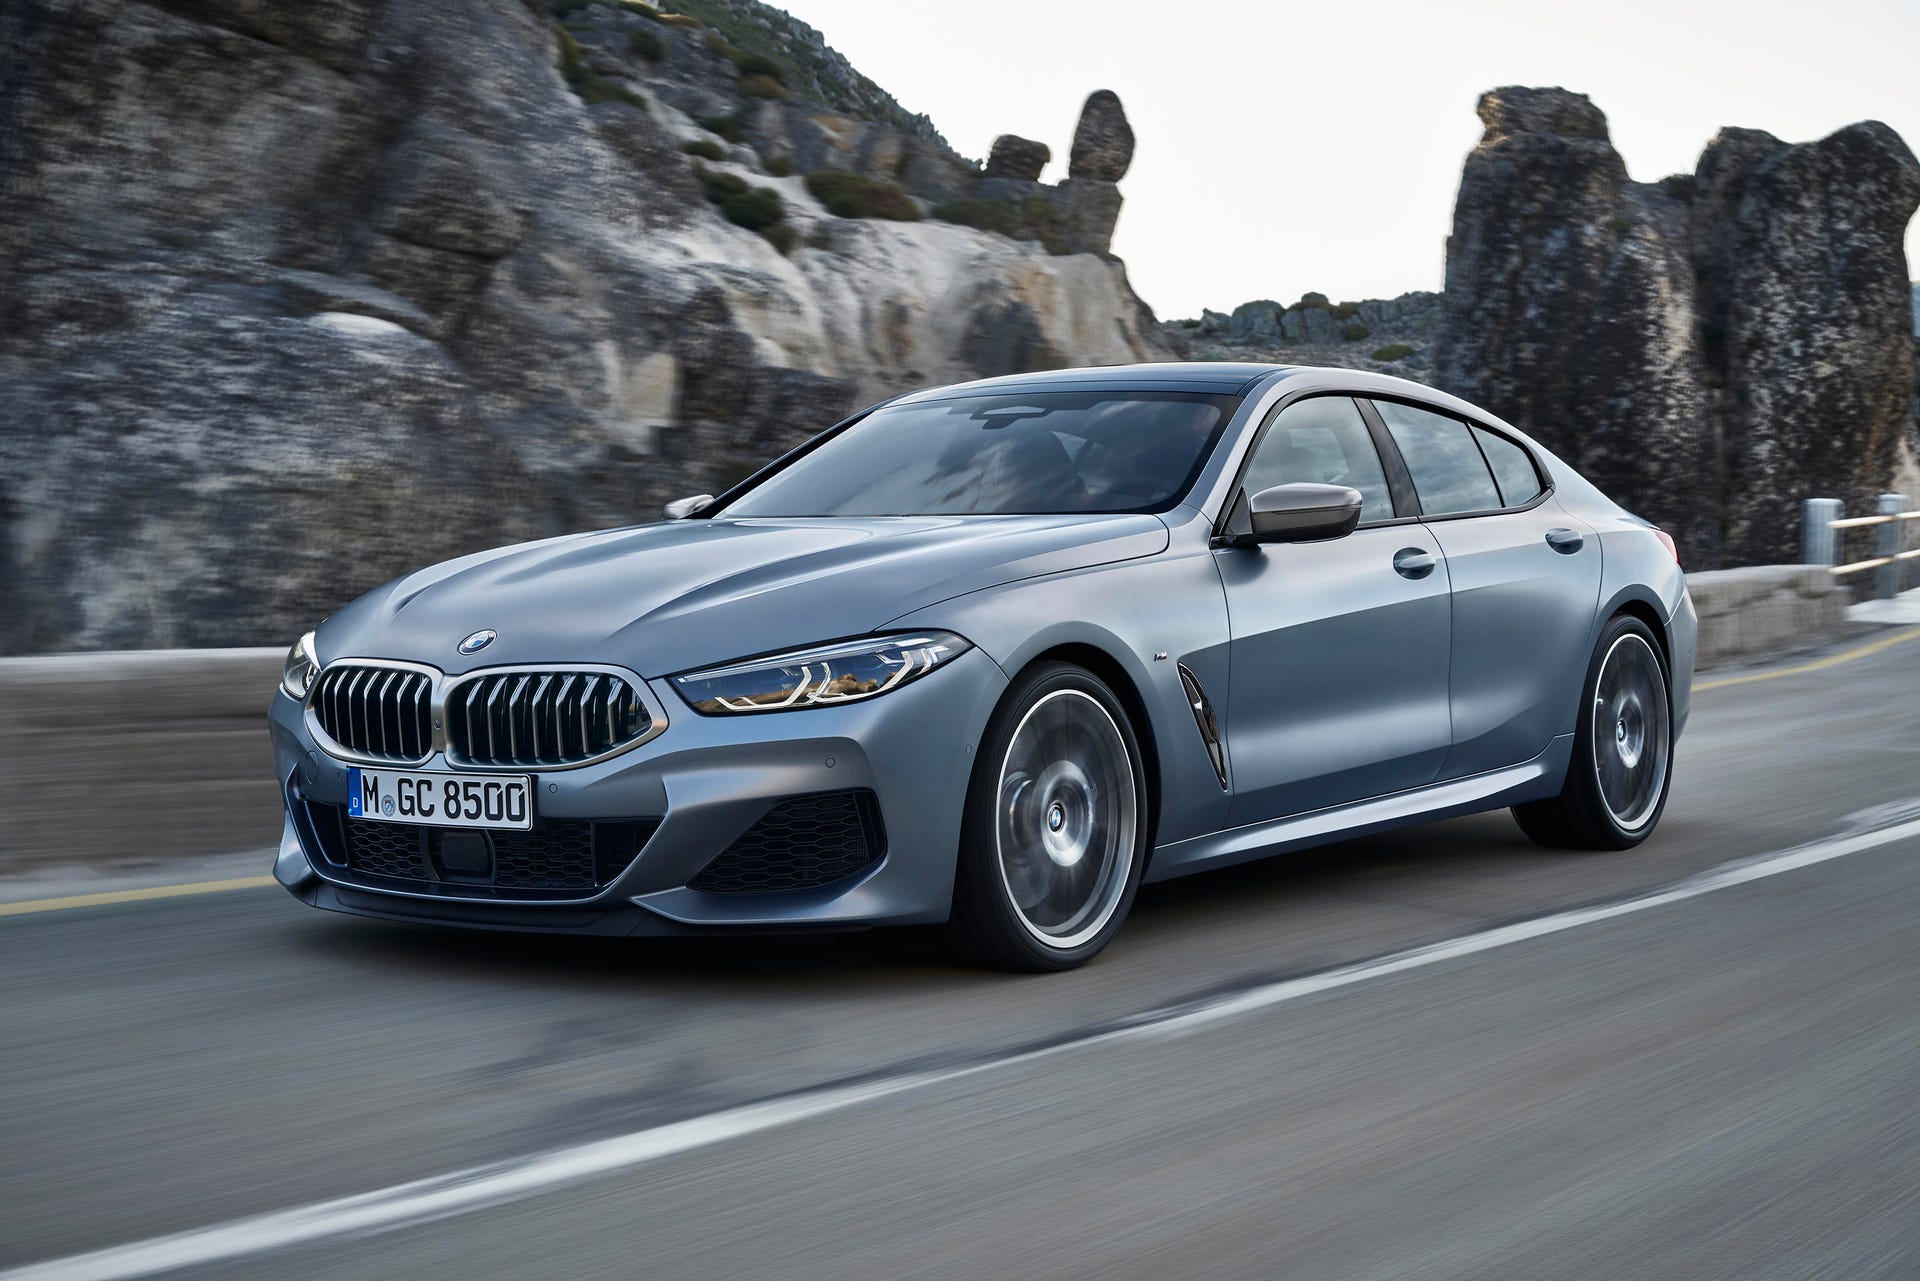 Alpina will tune the BMW 8 Series for a B6 Gran Coupe replacement - CNET